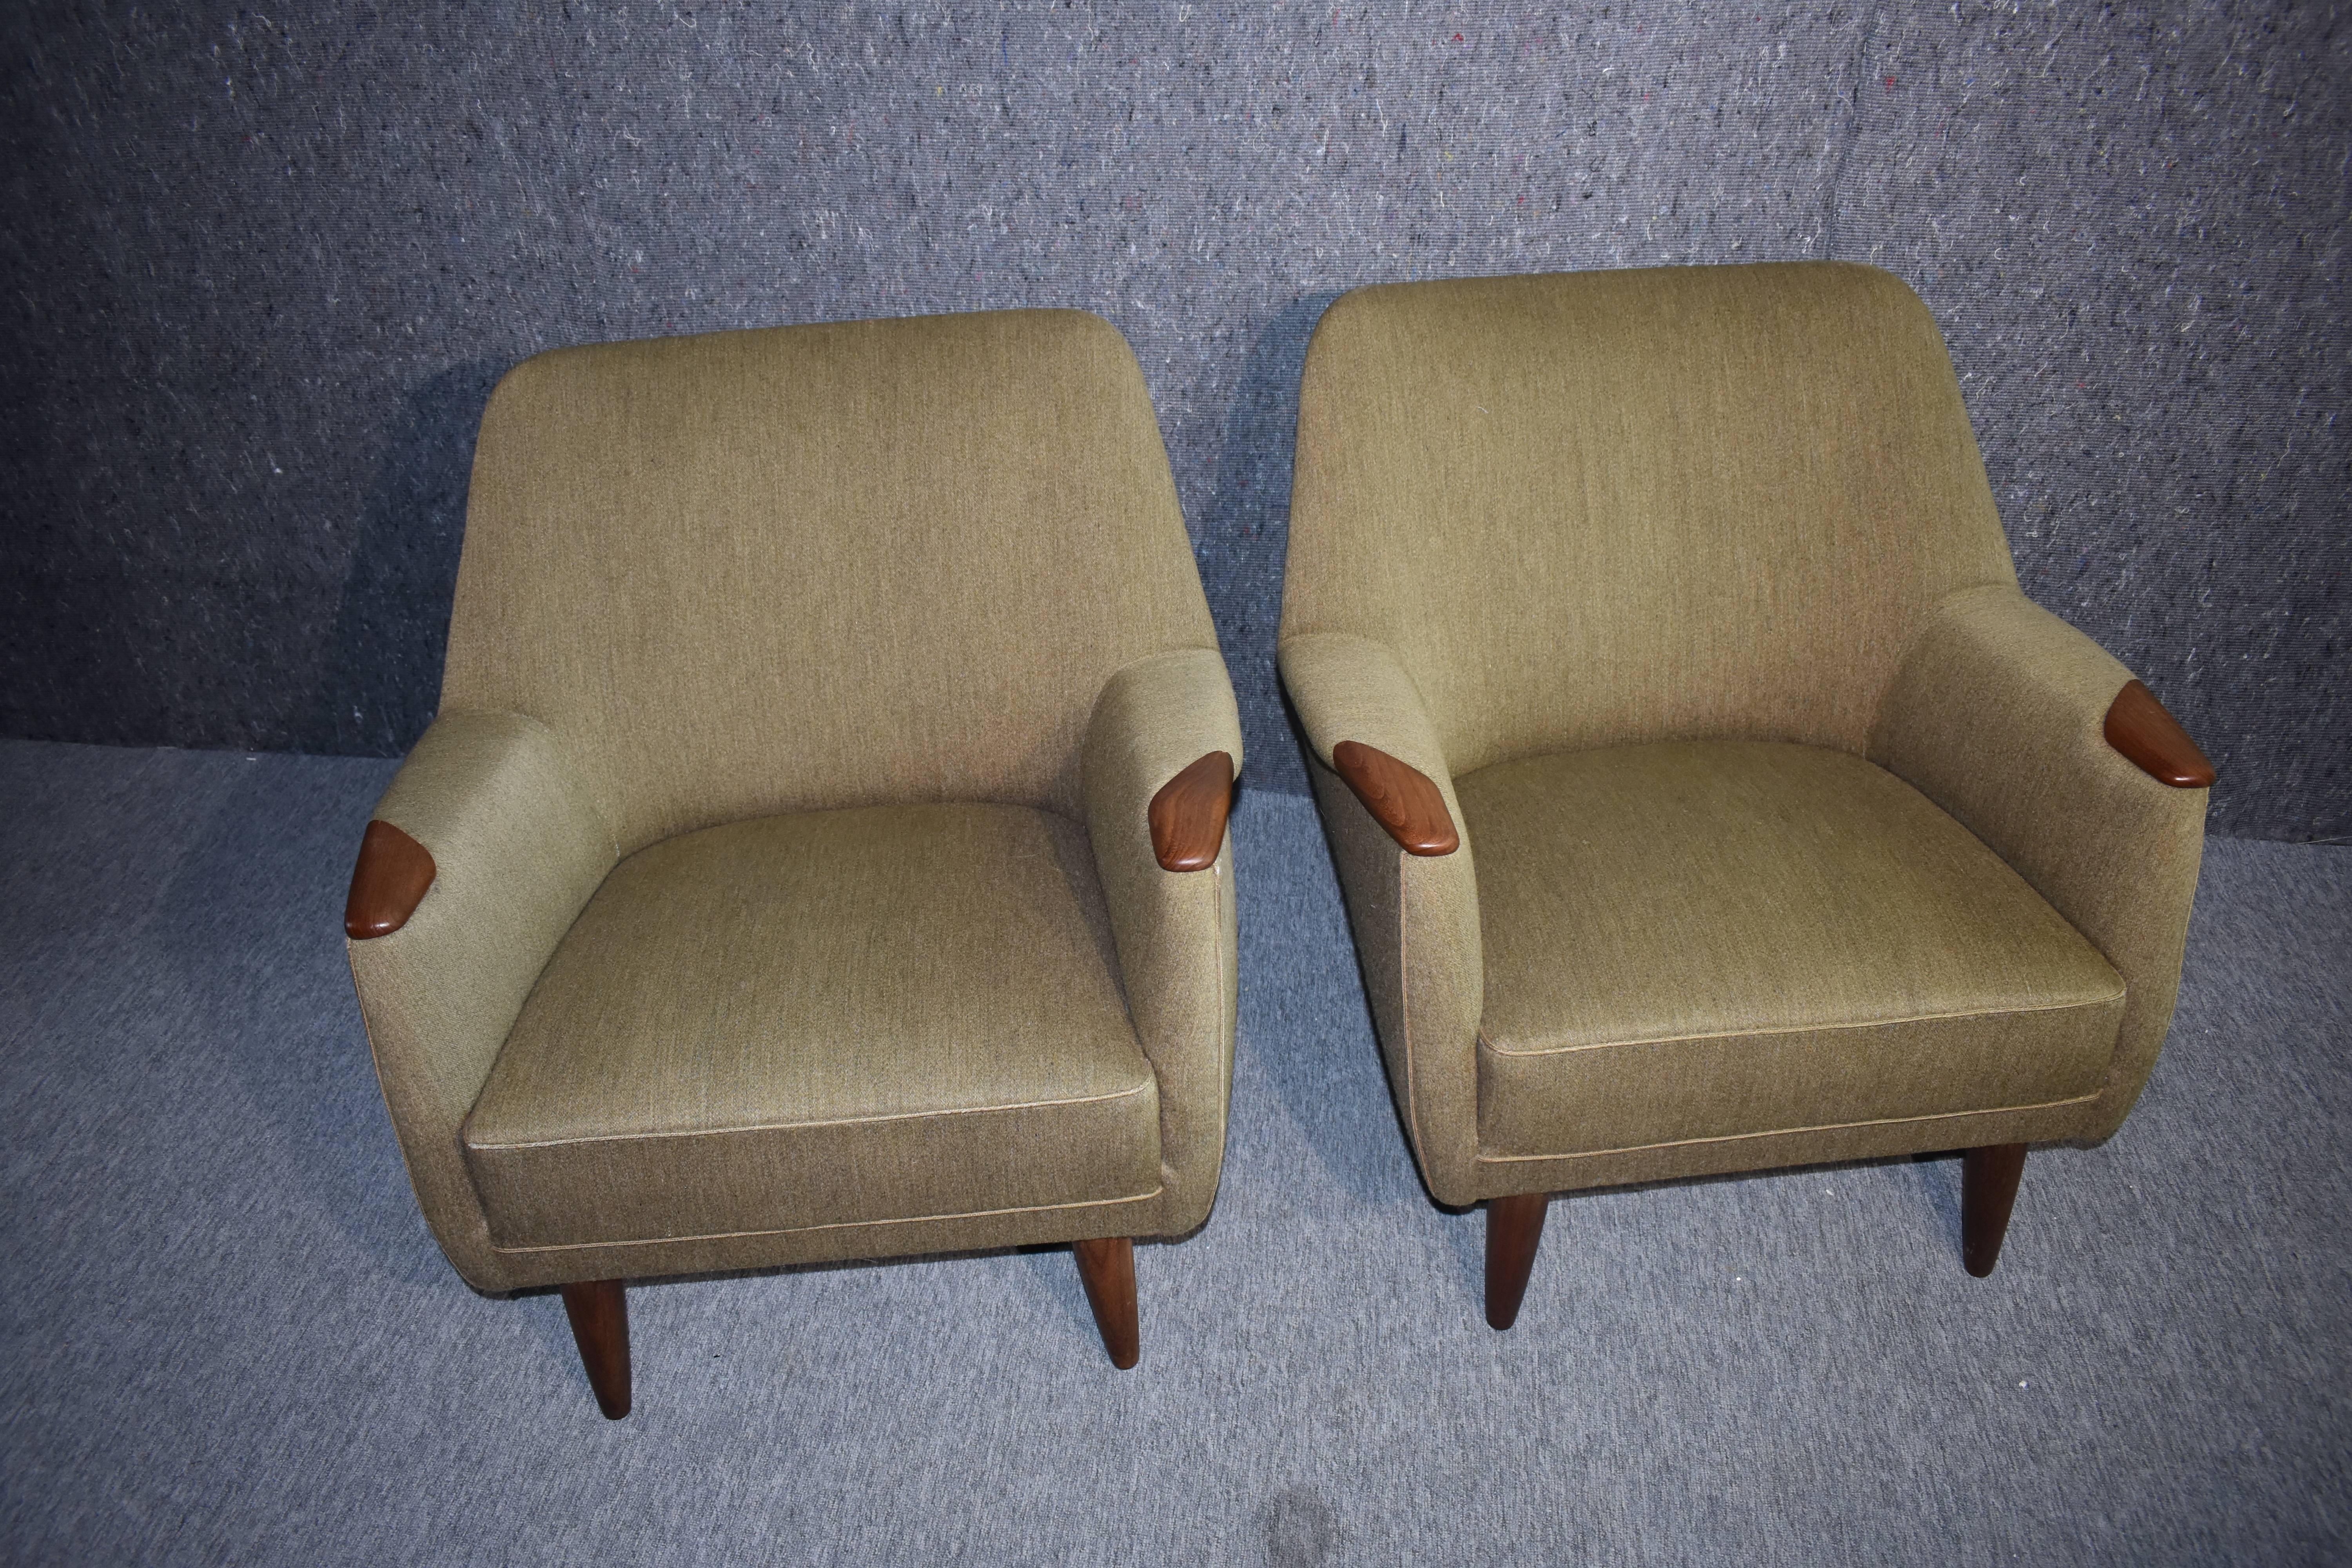 Dusted Green Lounge Chairs, Danish Mid-Century Modern, 1960s For Sale 1